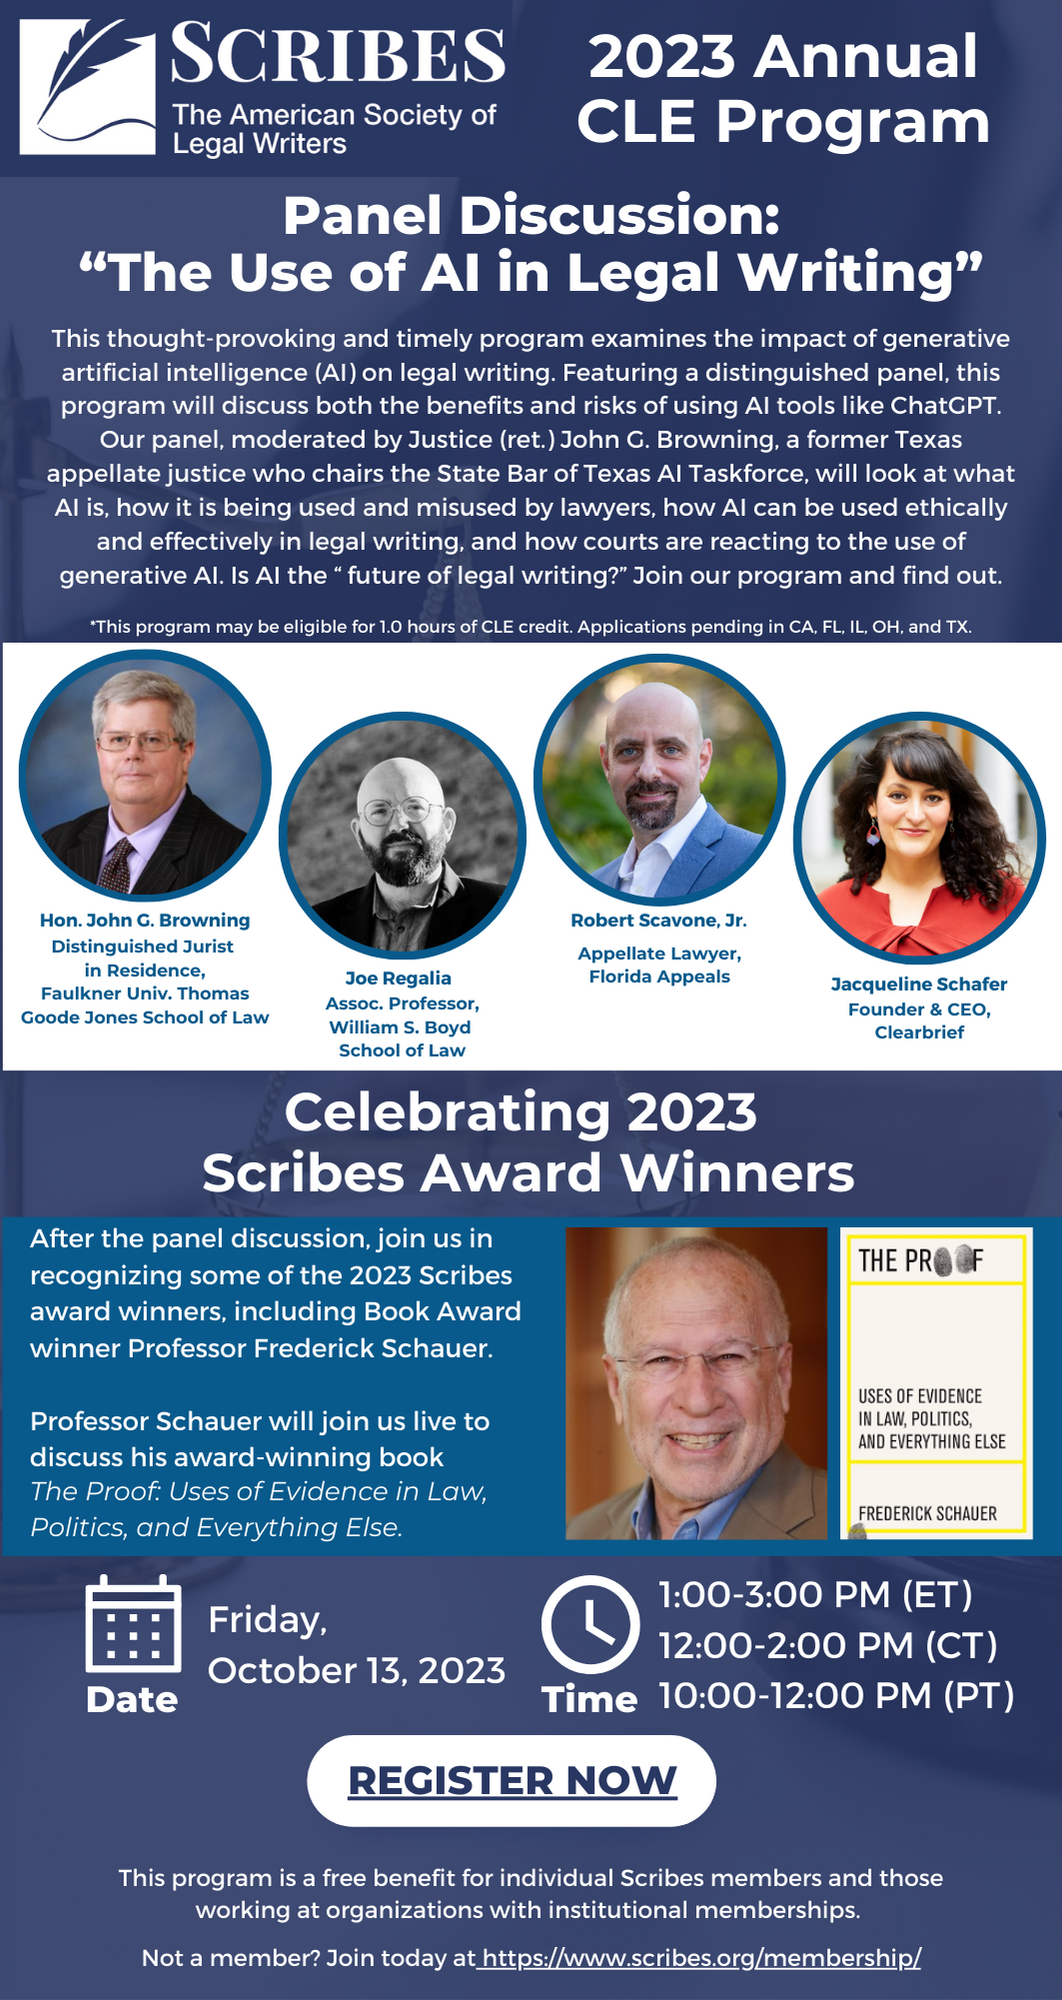 A flyer discussing the 2023 Scribes Annual CLE Program